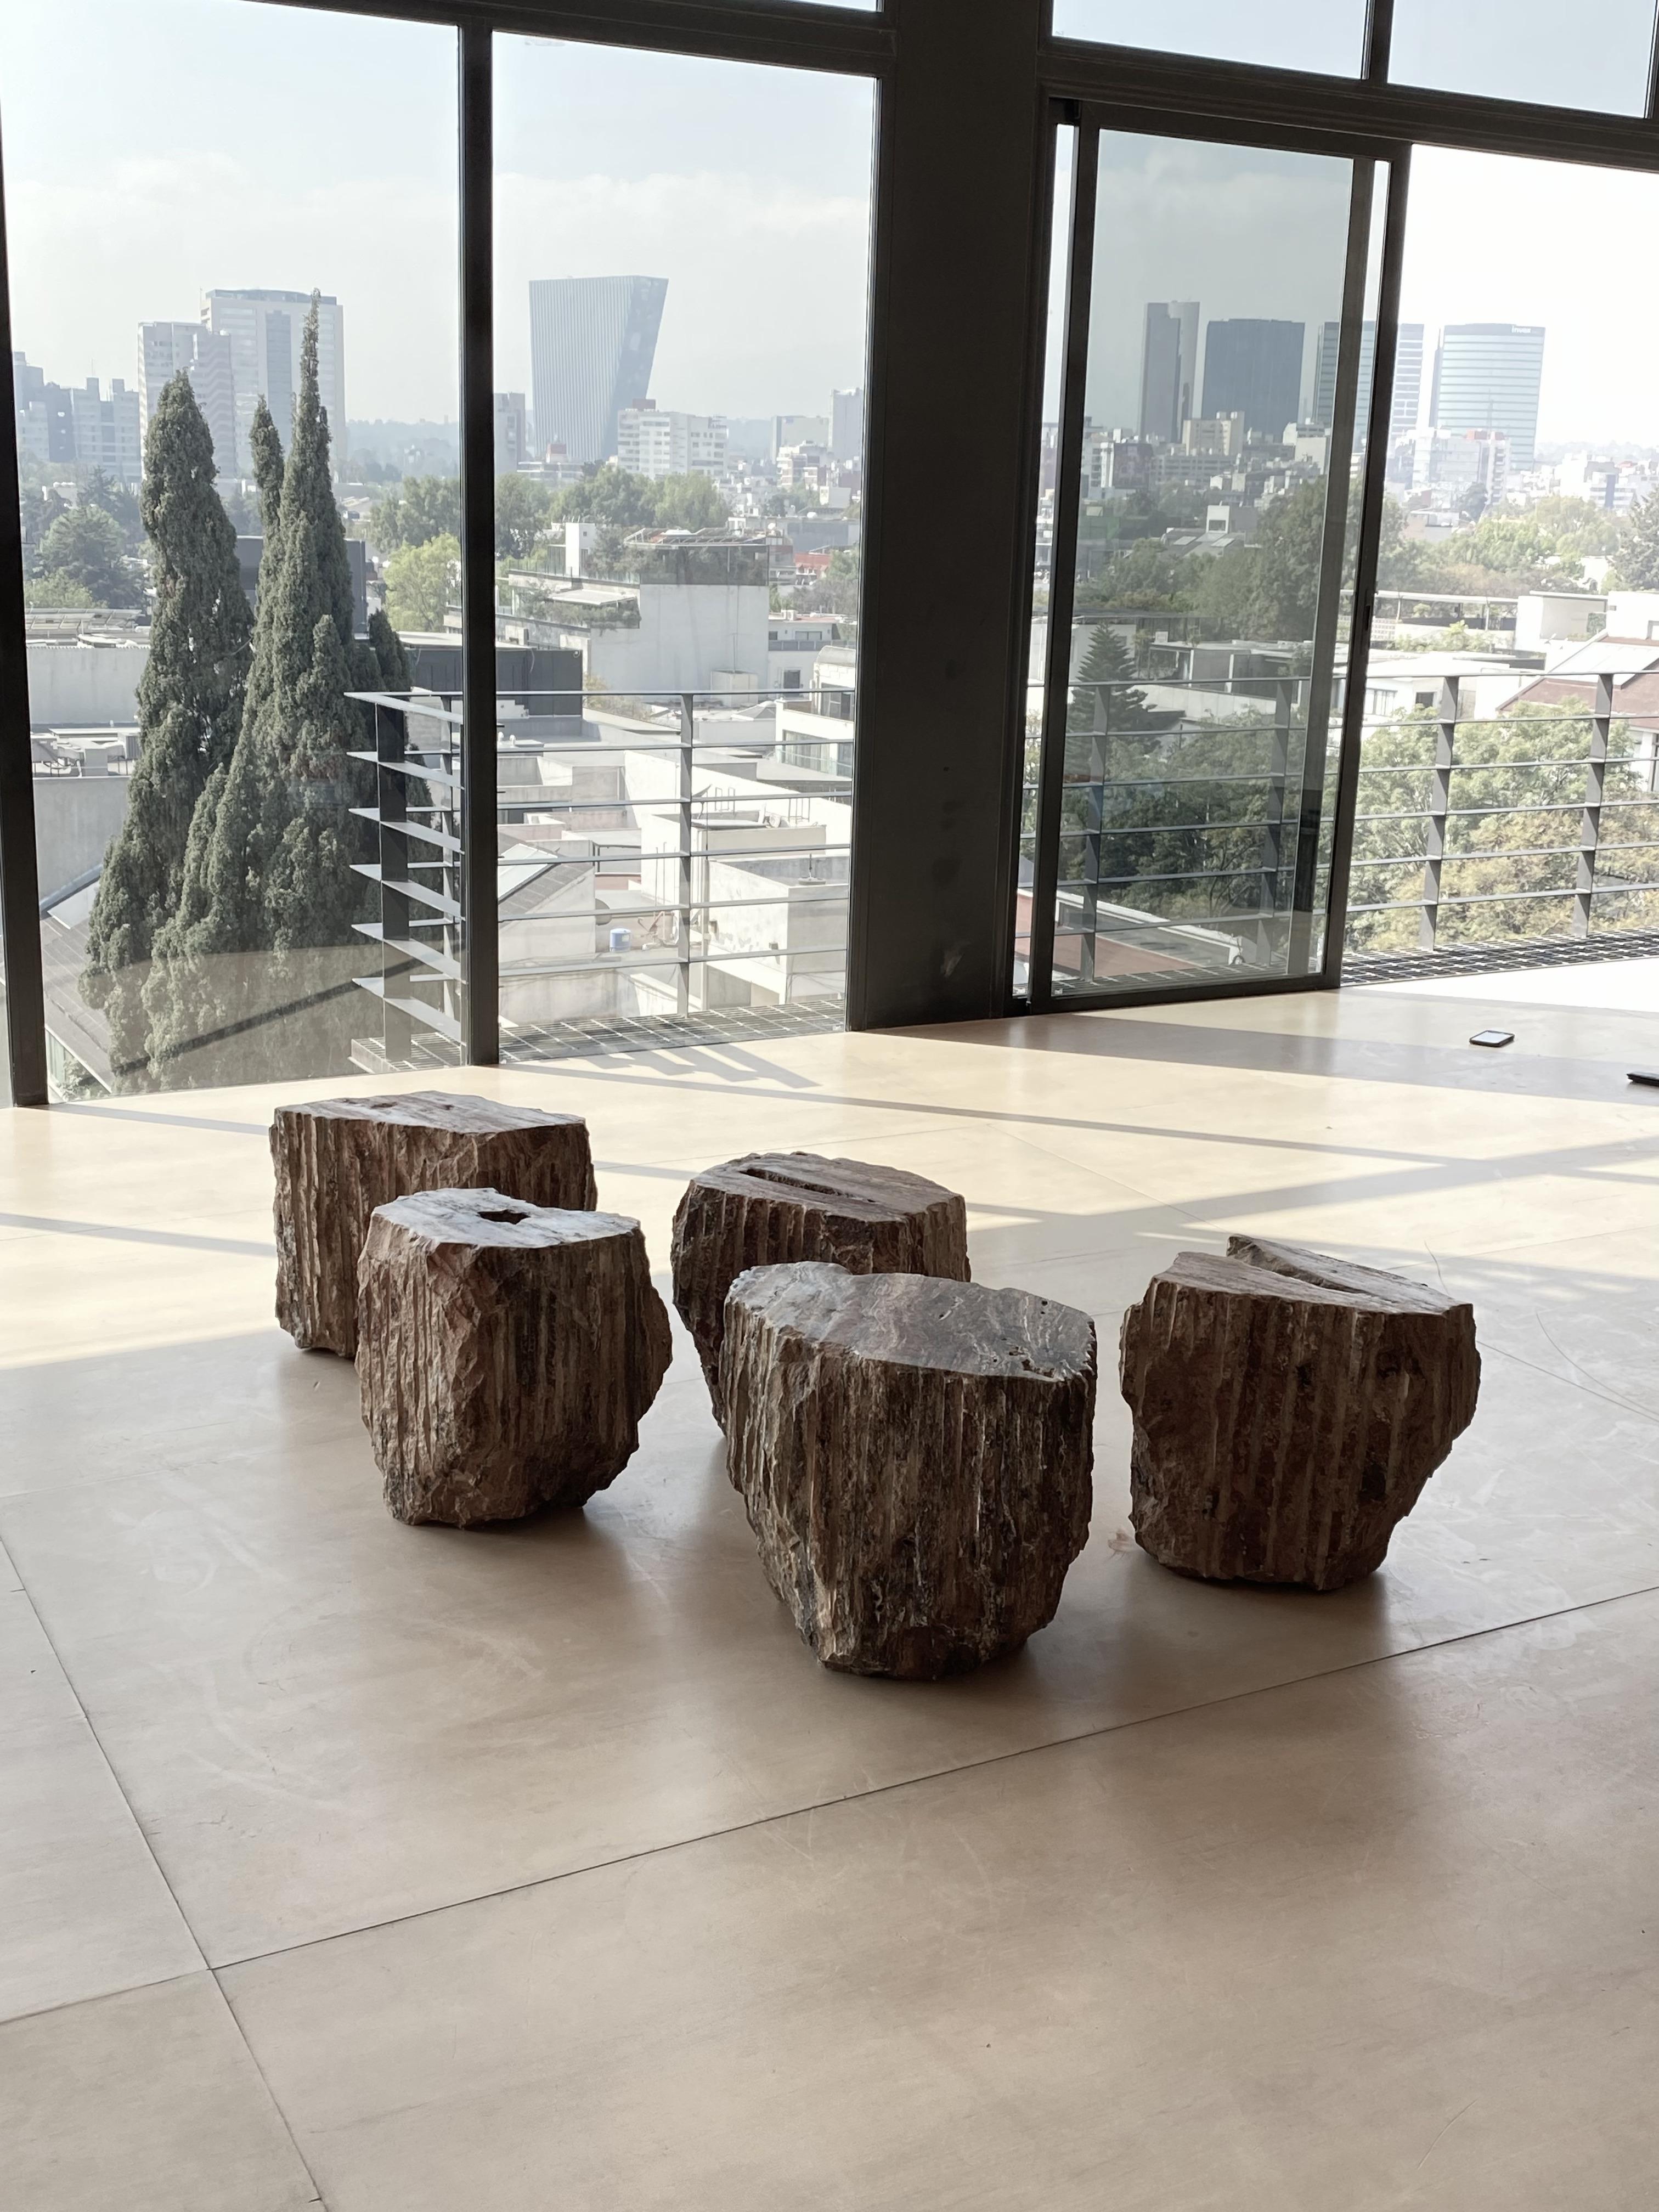 Fragmentos side table by Andres Monnier.
Dimensions: D 90 x W 150 x H 35 cm
Materials: Grey marble, stainless steel, red travertine
Andrés Monnier, born in Guadalajara but based in Ensenada, Mexico. His purpose is to create sculptural pieces to